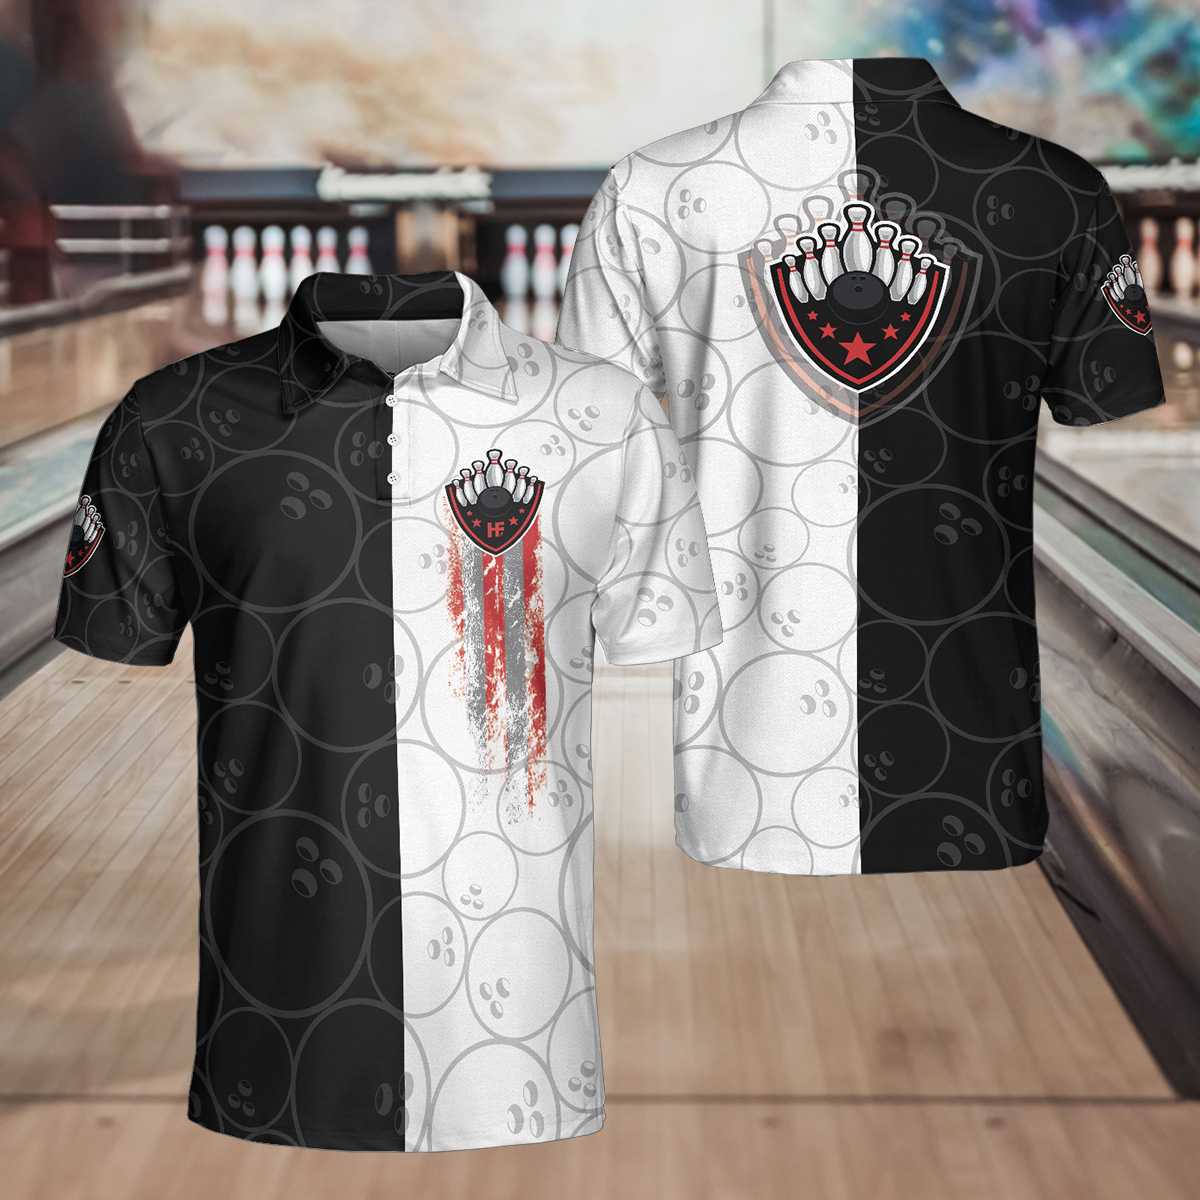 Bowling Black And White Pattern Short Sleeve Polo Shirt/ Bowling Ball Polo Shirt/ Best Bowling Shirt For Men Coolspod